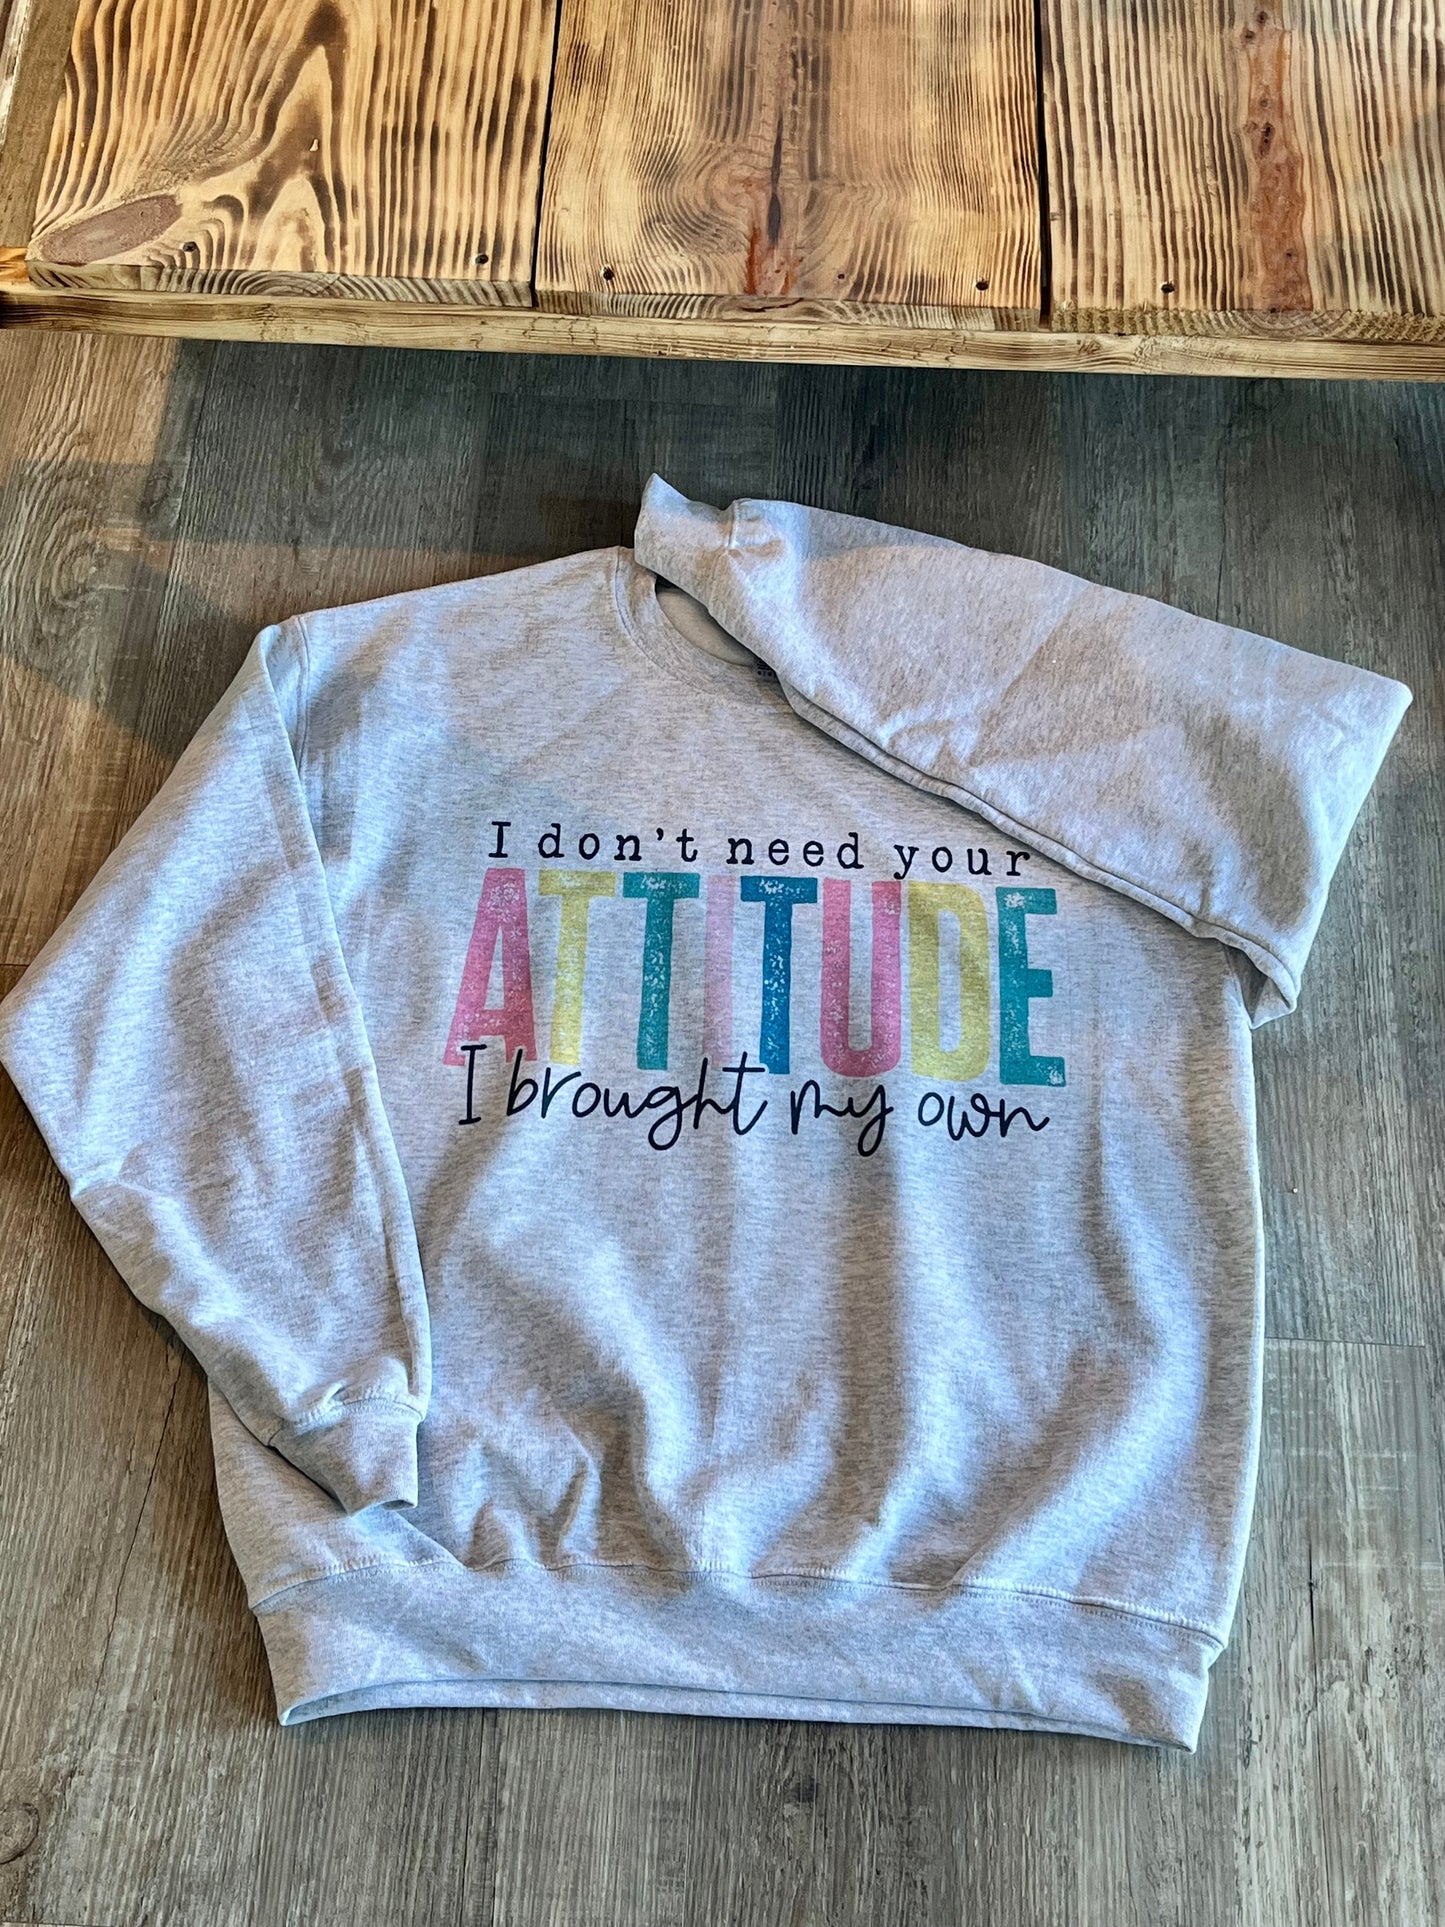 Shirt of the Week: I Don't Need Your Attitude